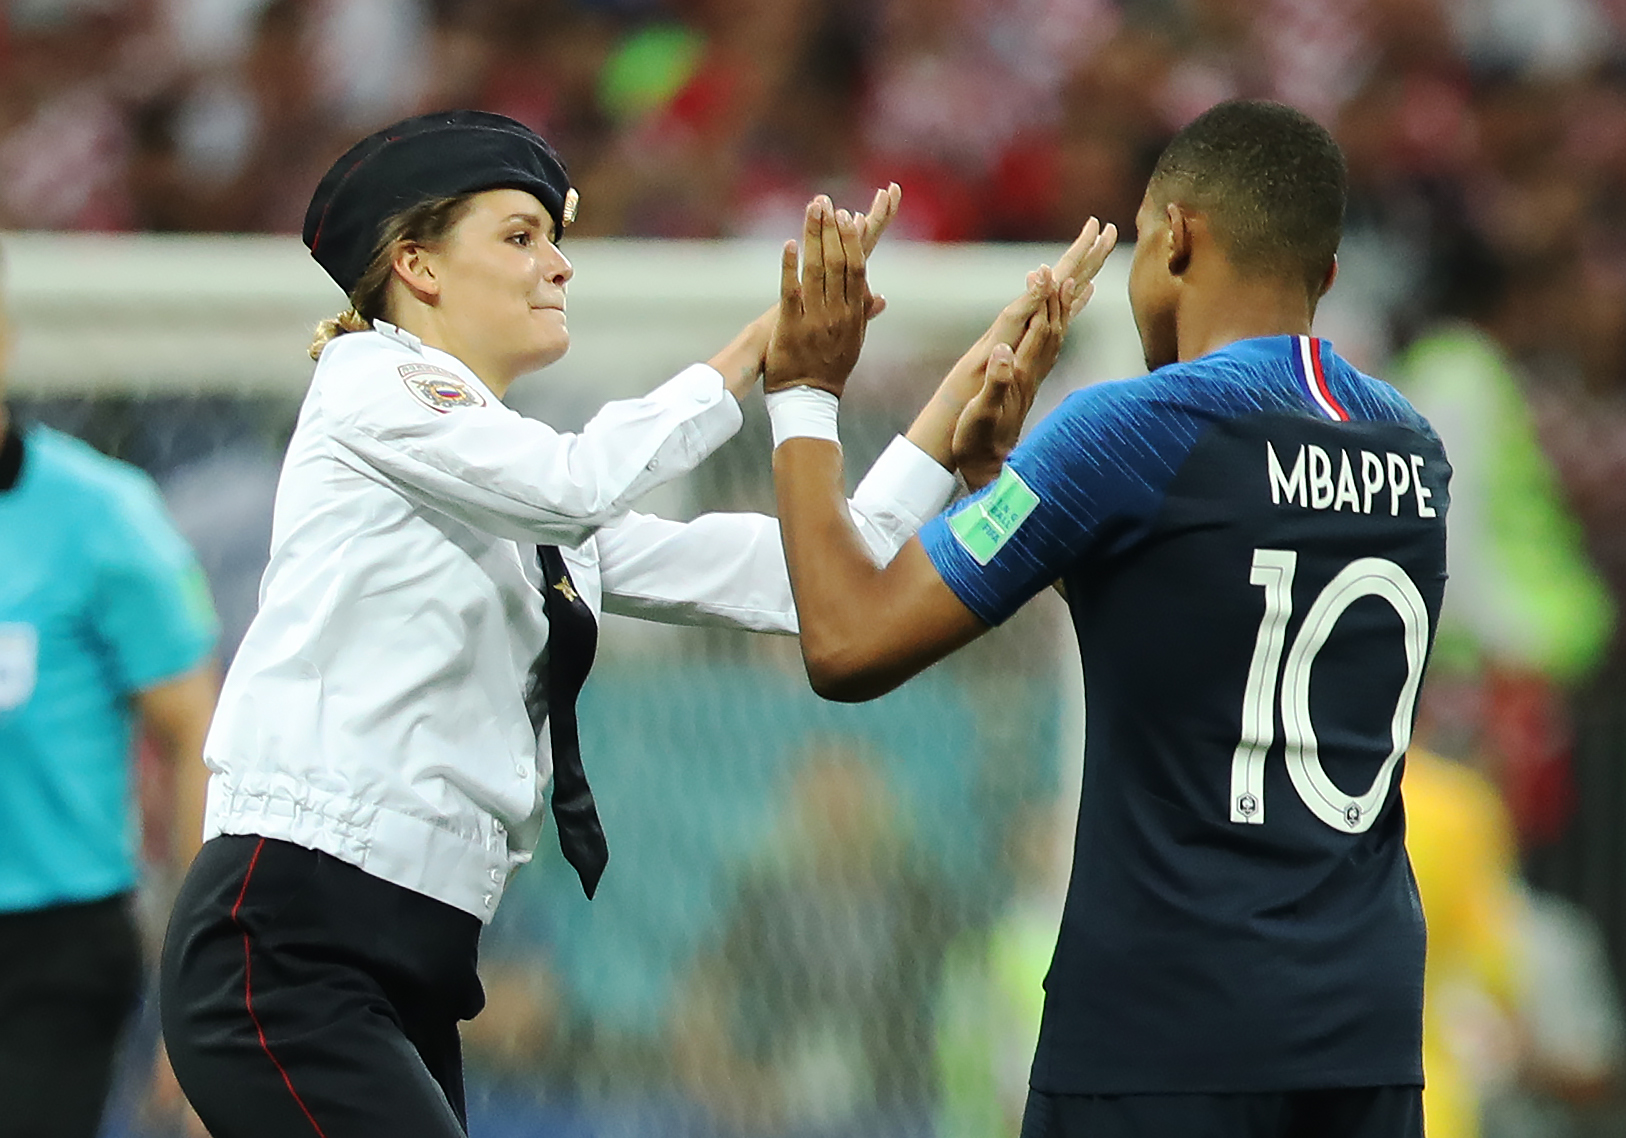 Anti-Kremlin Russian protest group Pussy Riot has taken responsibility for the pitch invasion at the 2018 FIFA World Cup Russia Final between France and Croatia at Luzhniki Stadium on July 15, 2018 in Moscow. (Ian MacNicol—Getty Images)